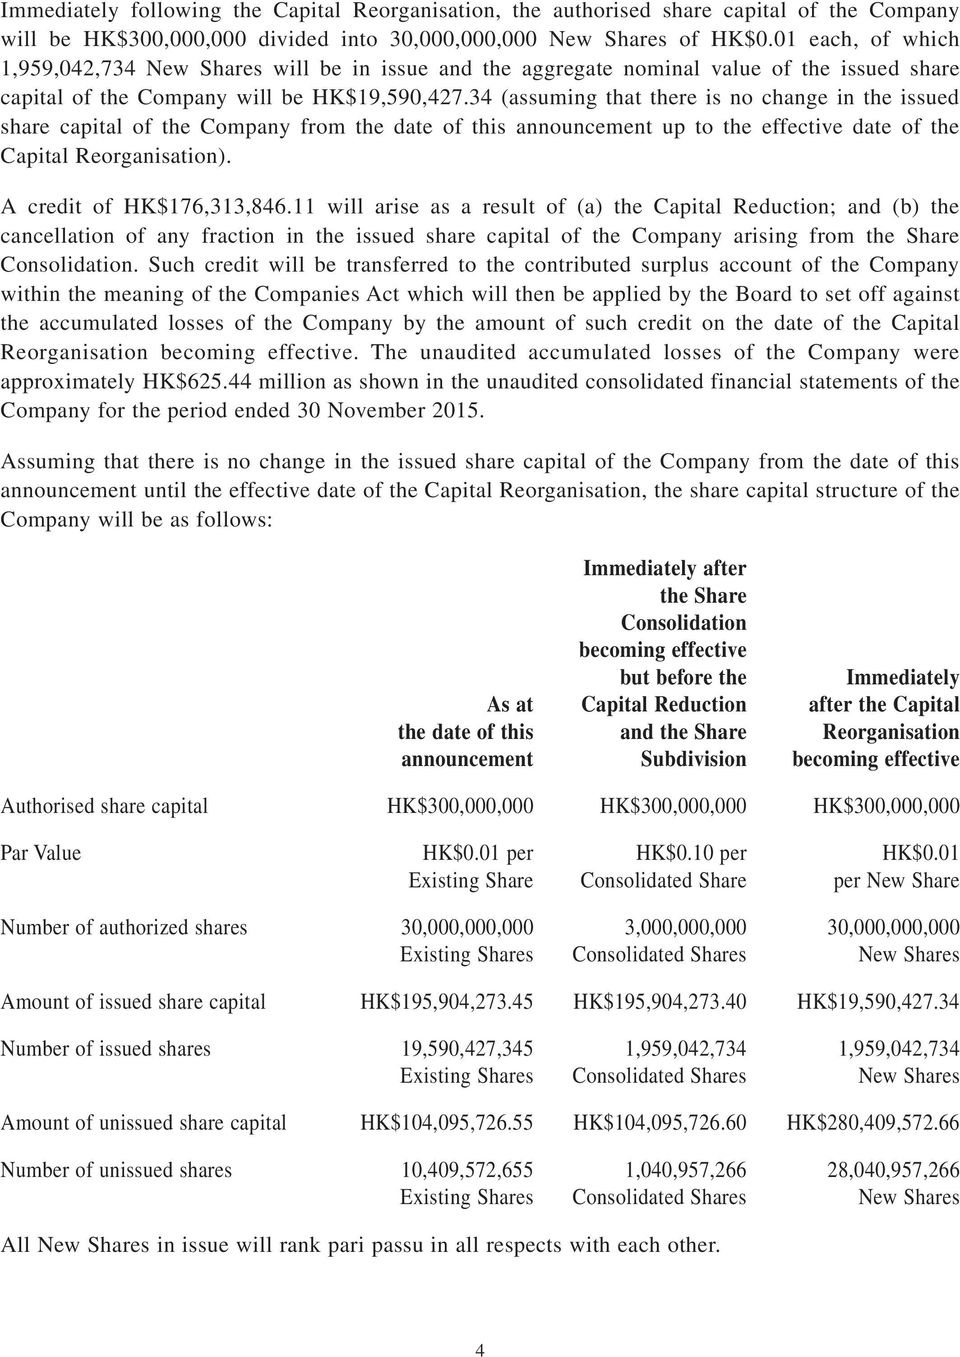 34 (assuming that there is no change in the issued share capital of the Company from the date of this announcement up to the effective date of the Capital Reorganisation). A credit of HK$176,313,846.